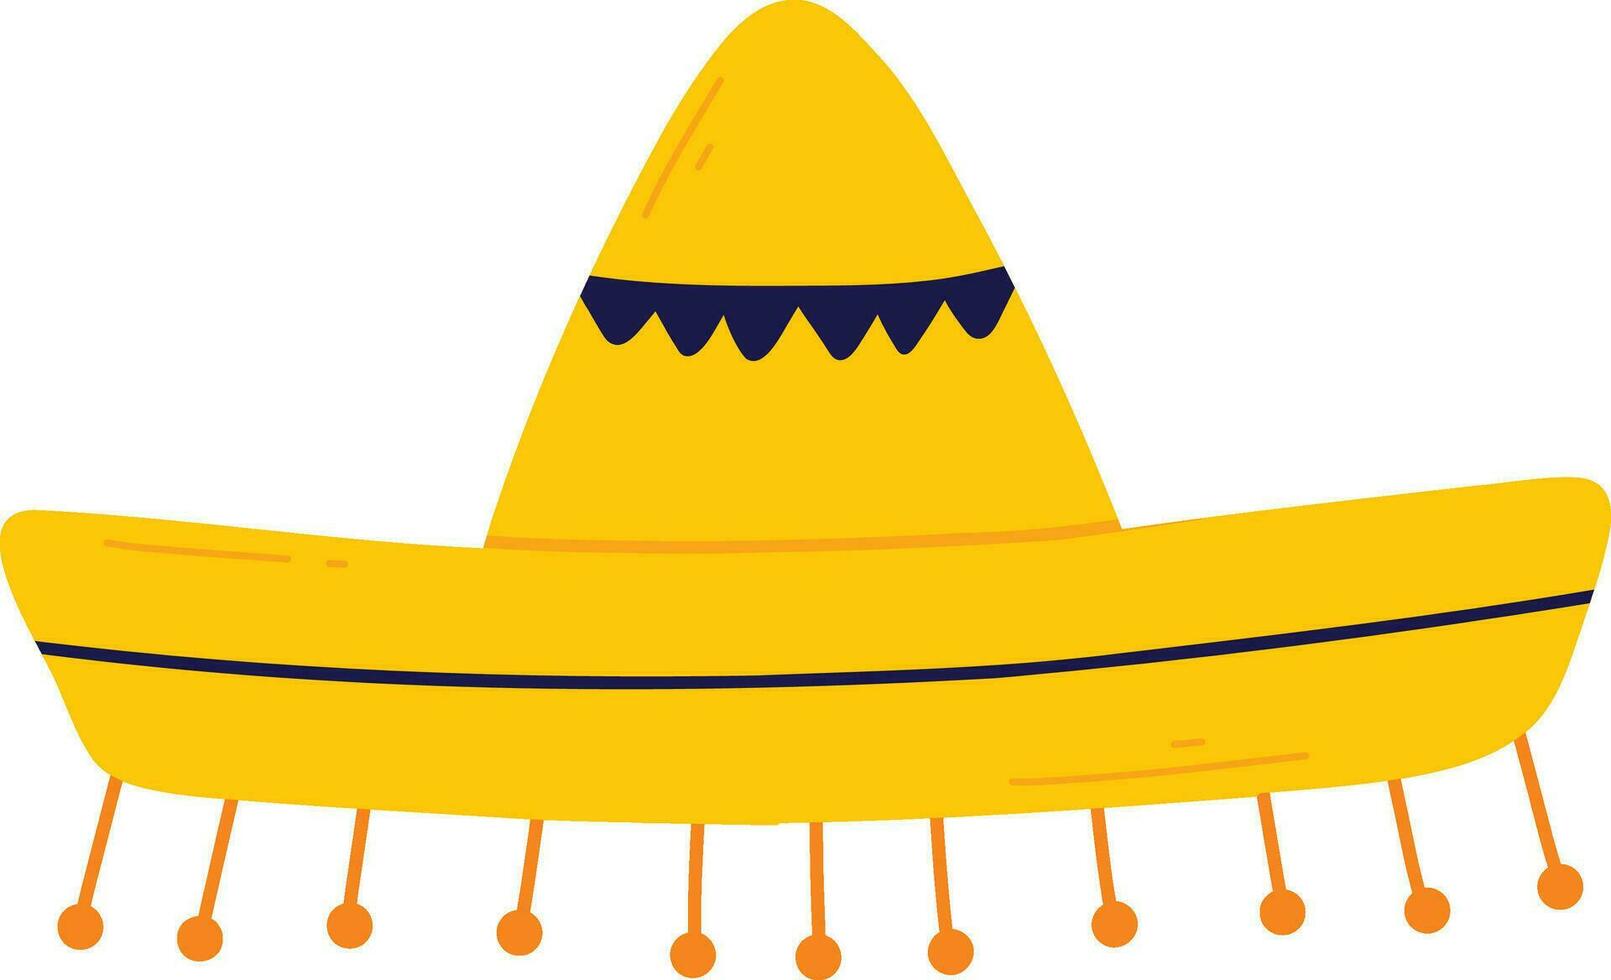 Sombrero in flat style. Isolated mexican hat. Vector illustration.